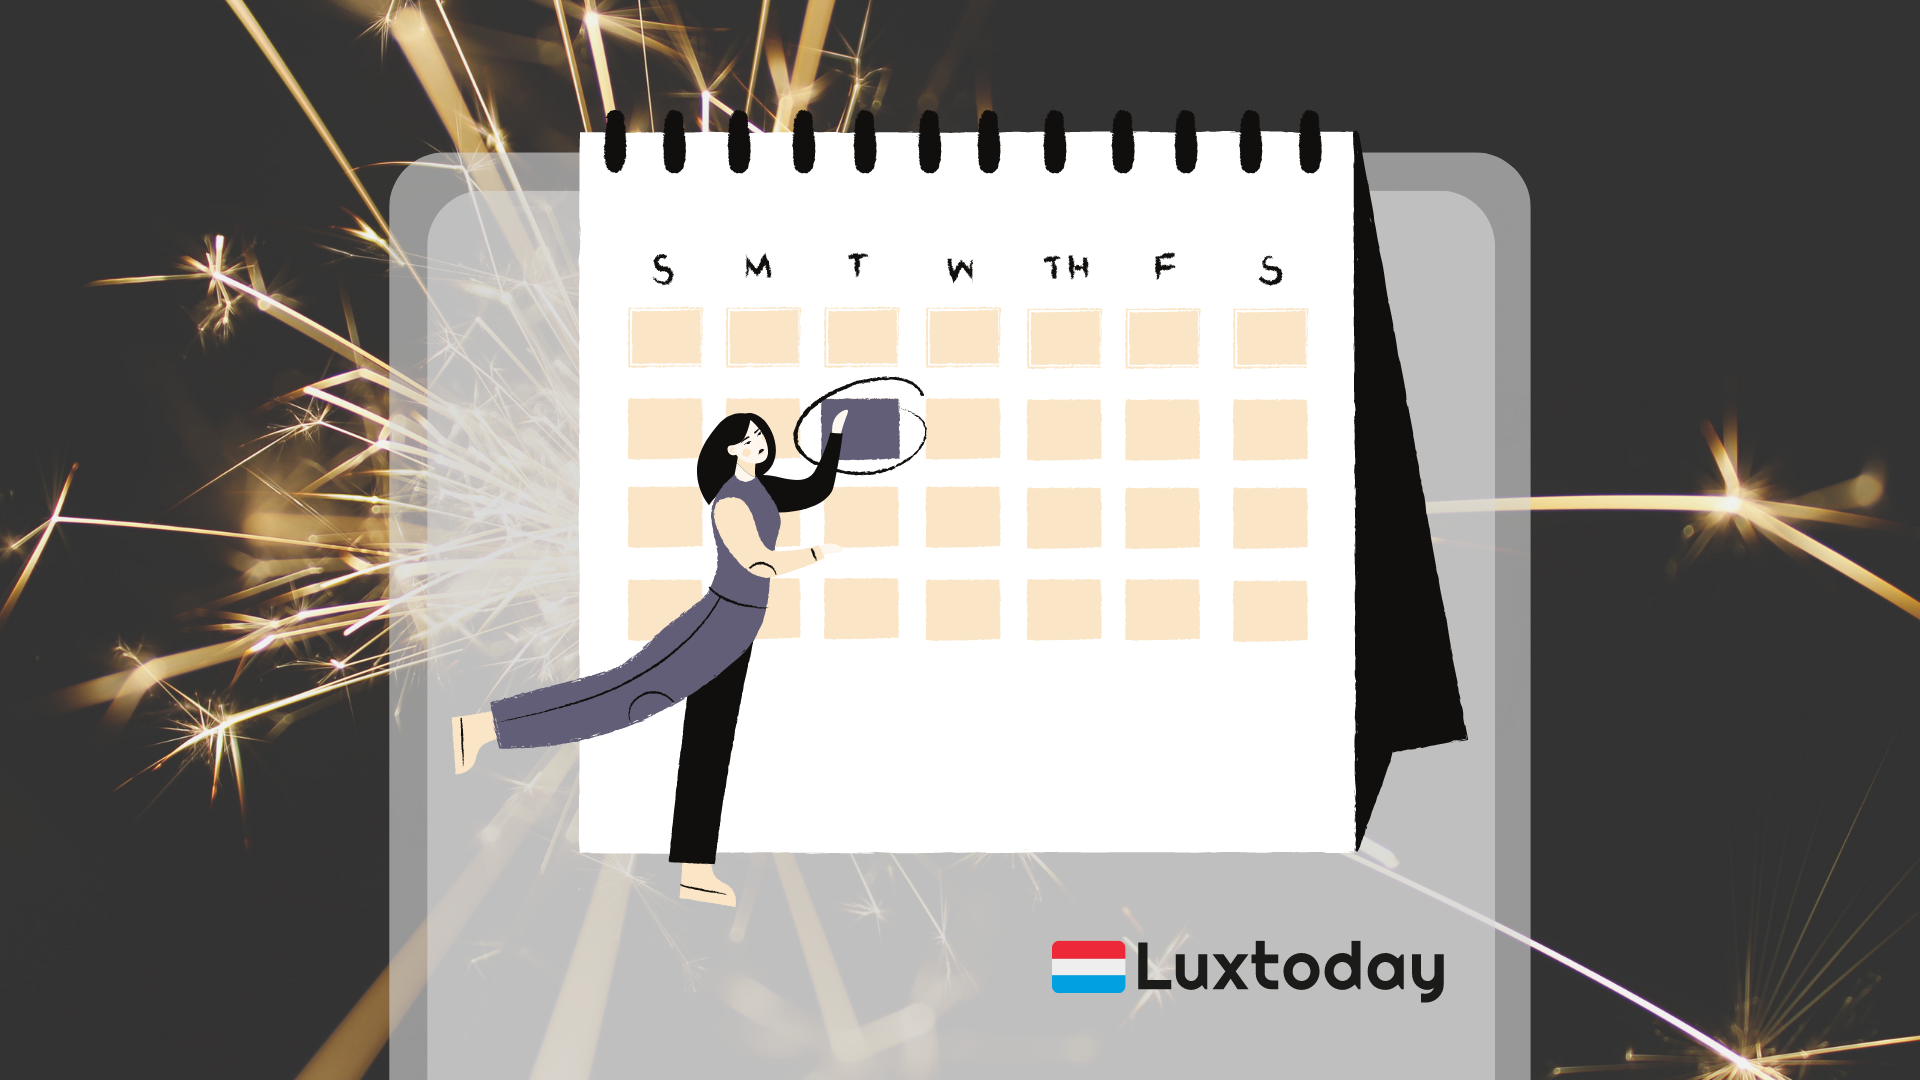 Luxembourg's official bank holidays: Luxtoday company blog